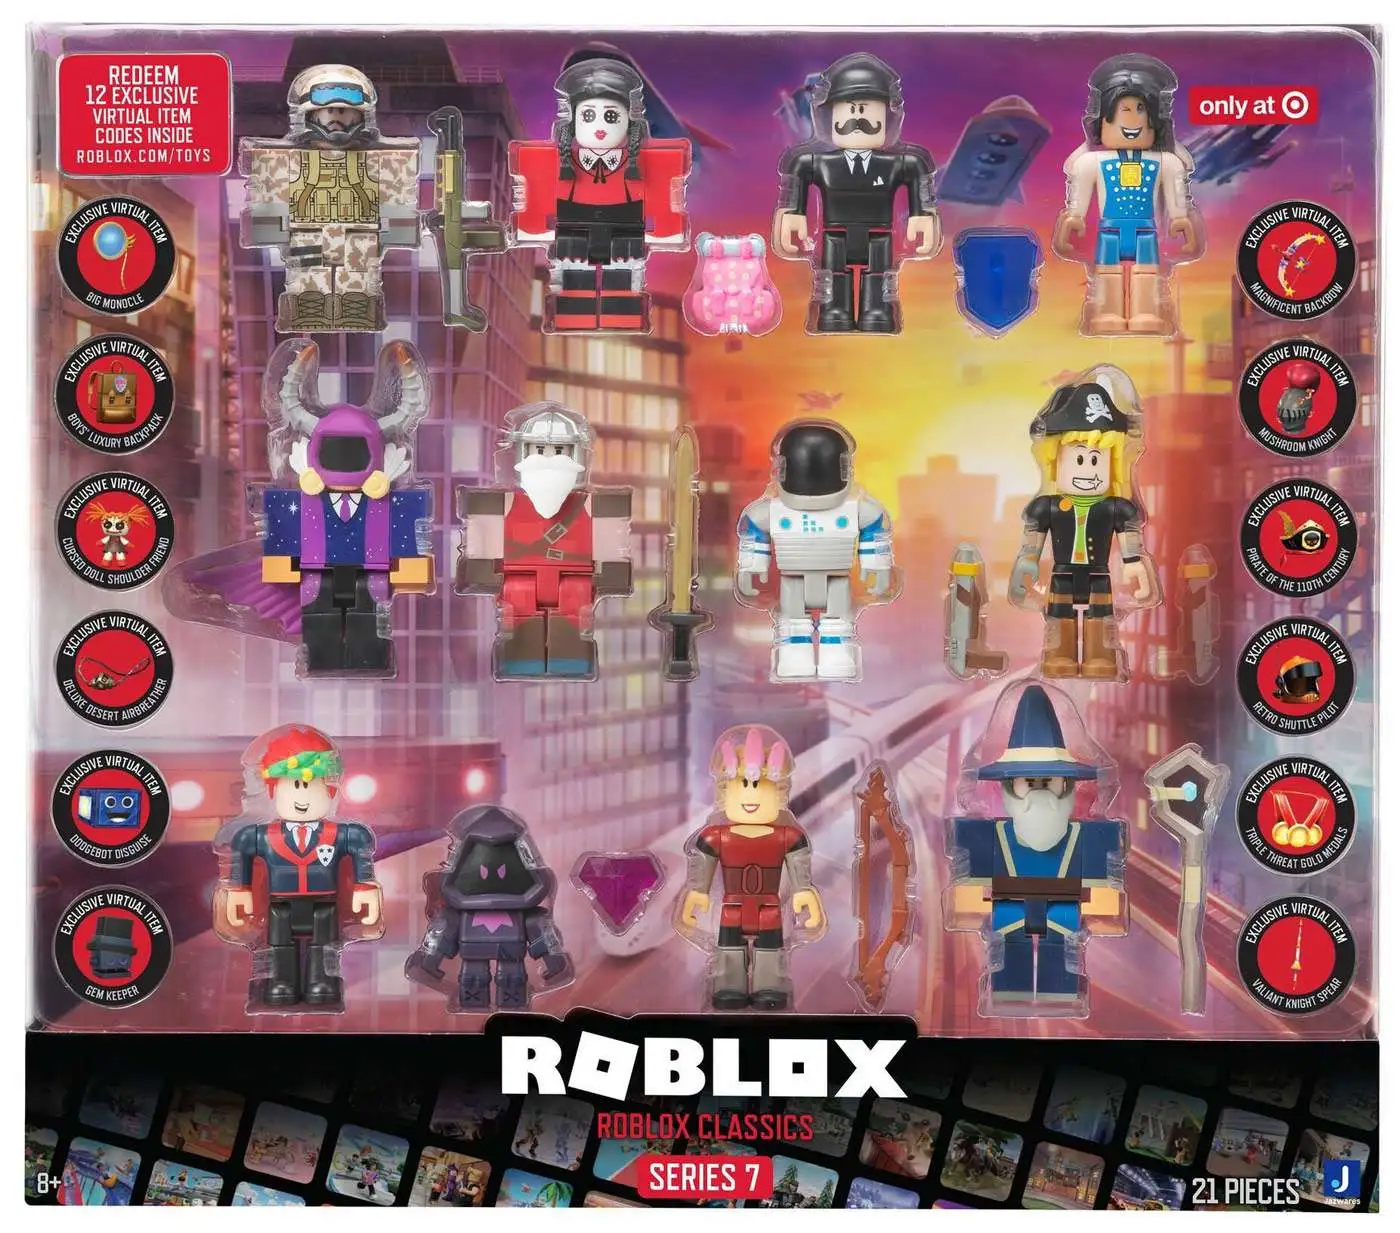 ALL ROBLOX TOY CODE ITEMS! (SERIES 7 SHOWCASE) 